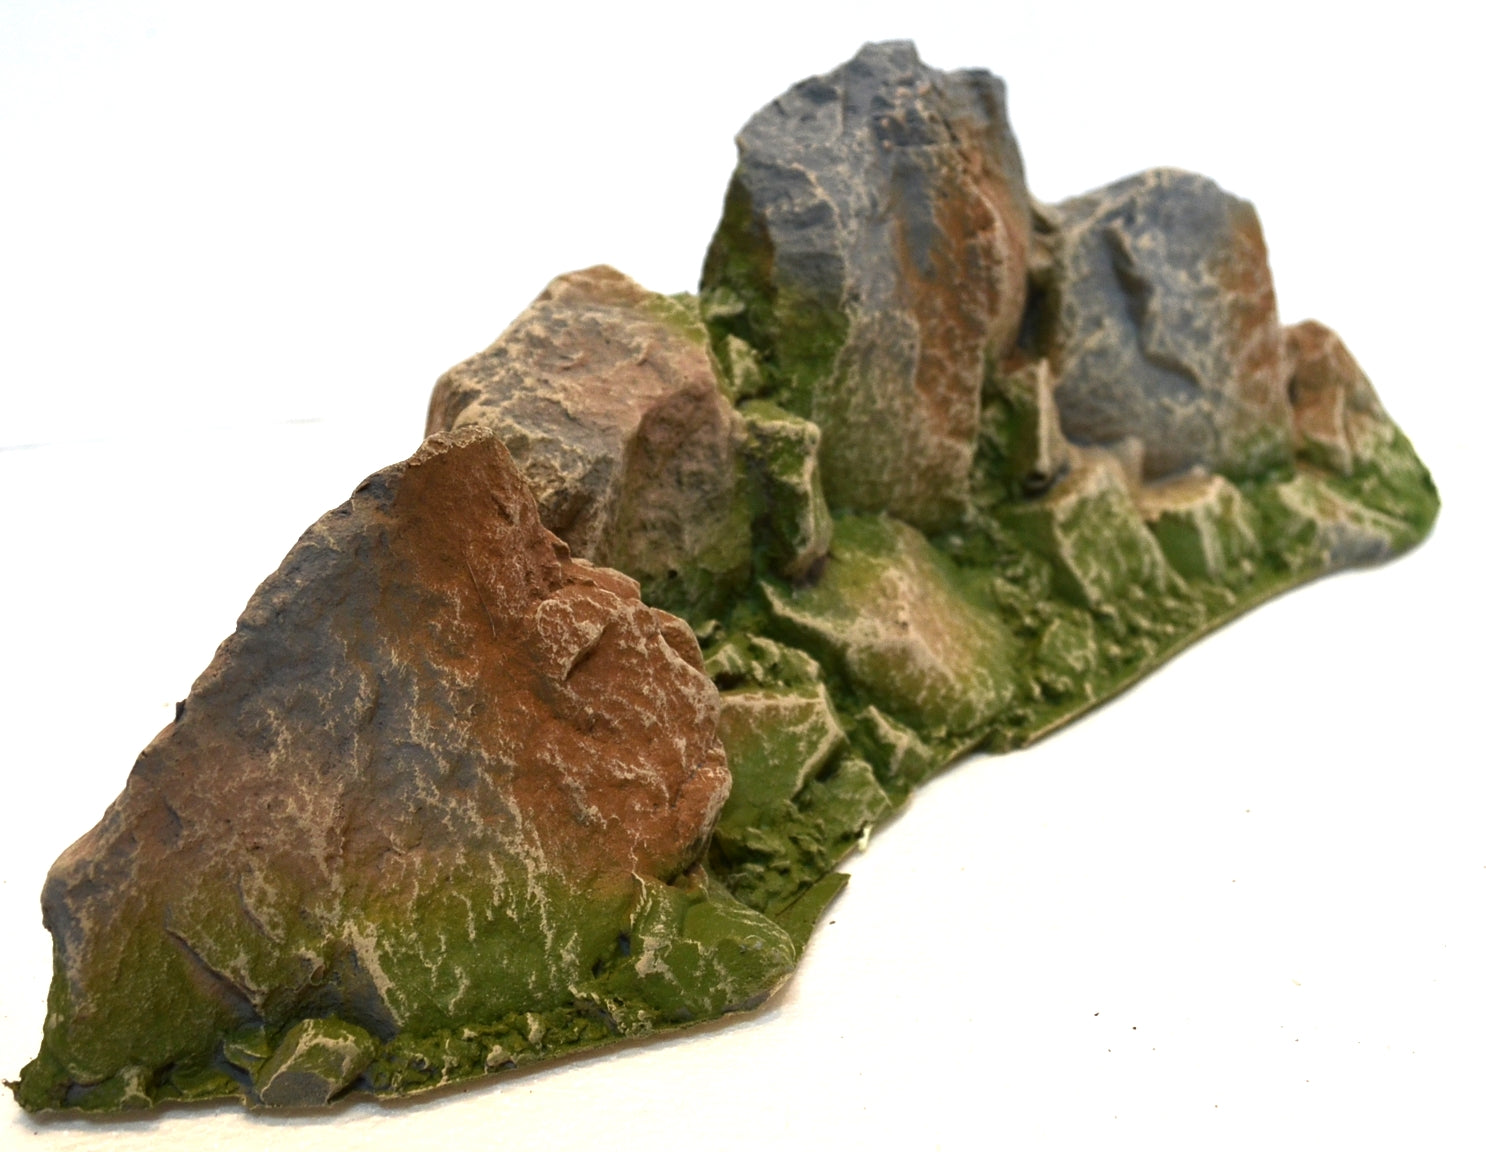 ATHERTON SCENICS PAINTED LARGE CURVED ROCK STONE CLIFF 9905